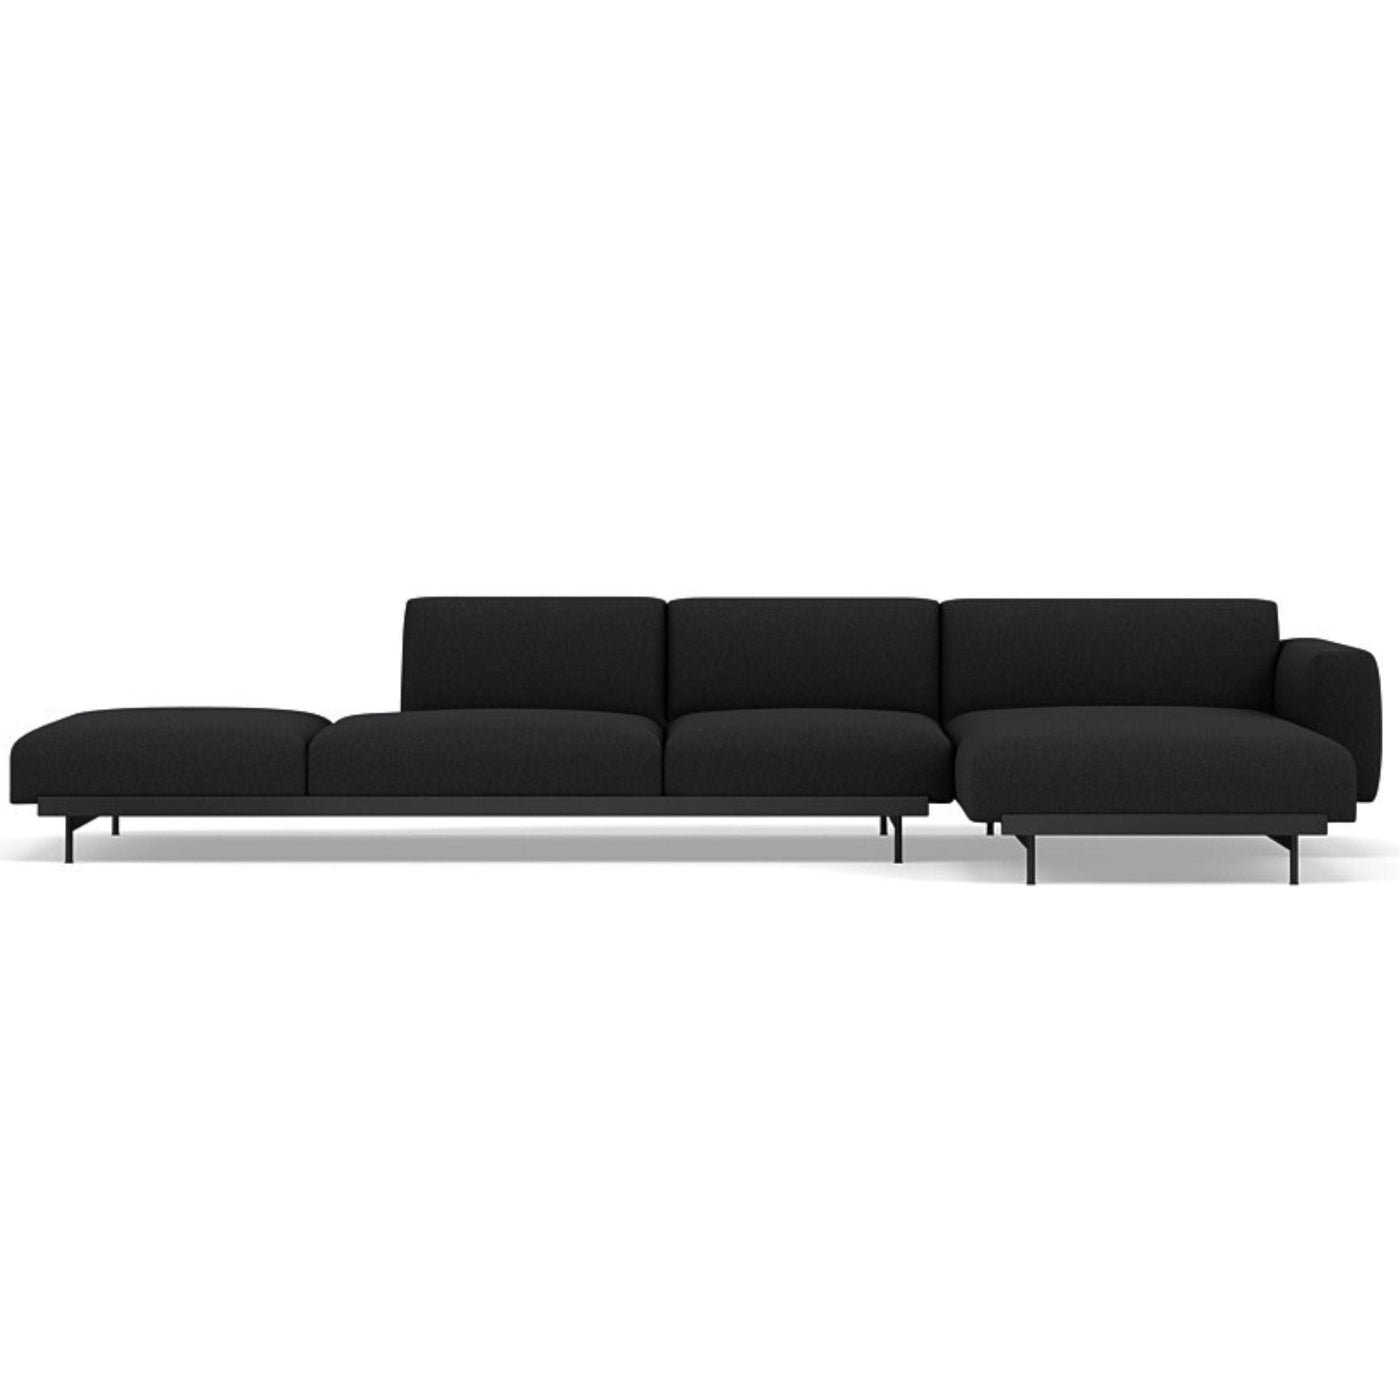 Muuto In Situ Modular 4 Seater Sofa configuration 4. Made to order from someday designs. #colour_divina-md-193